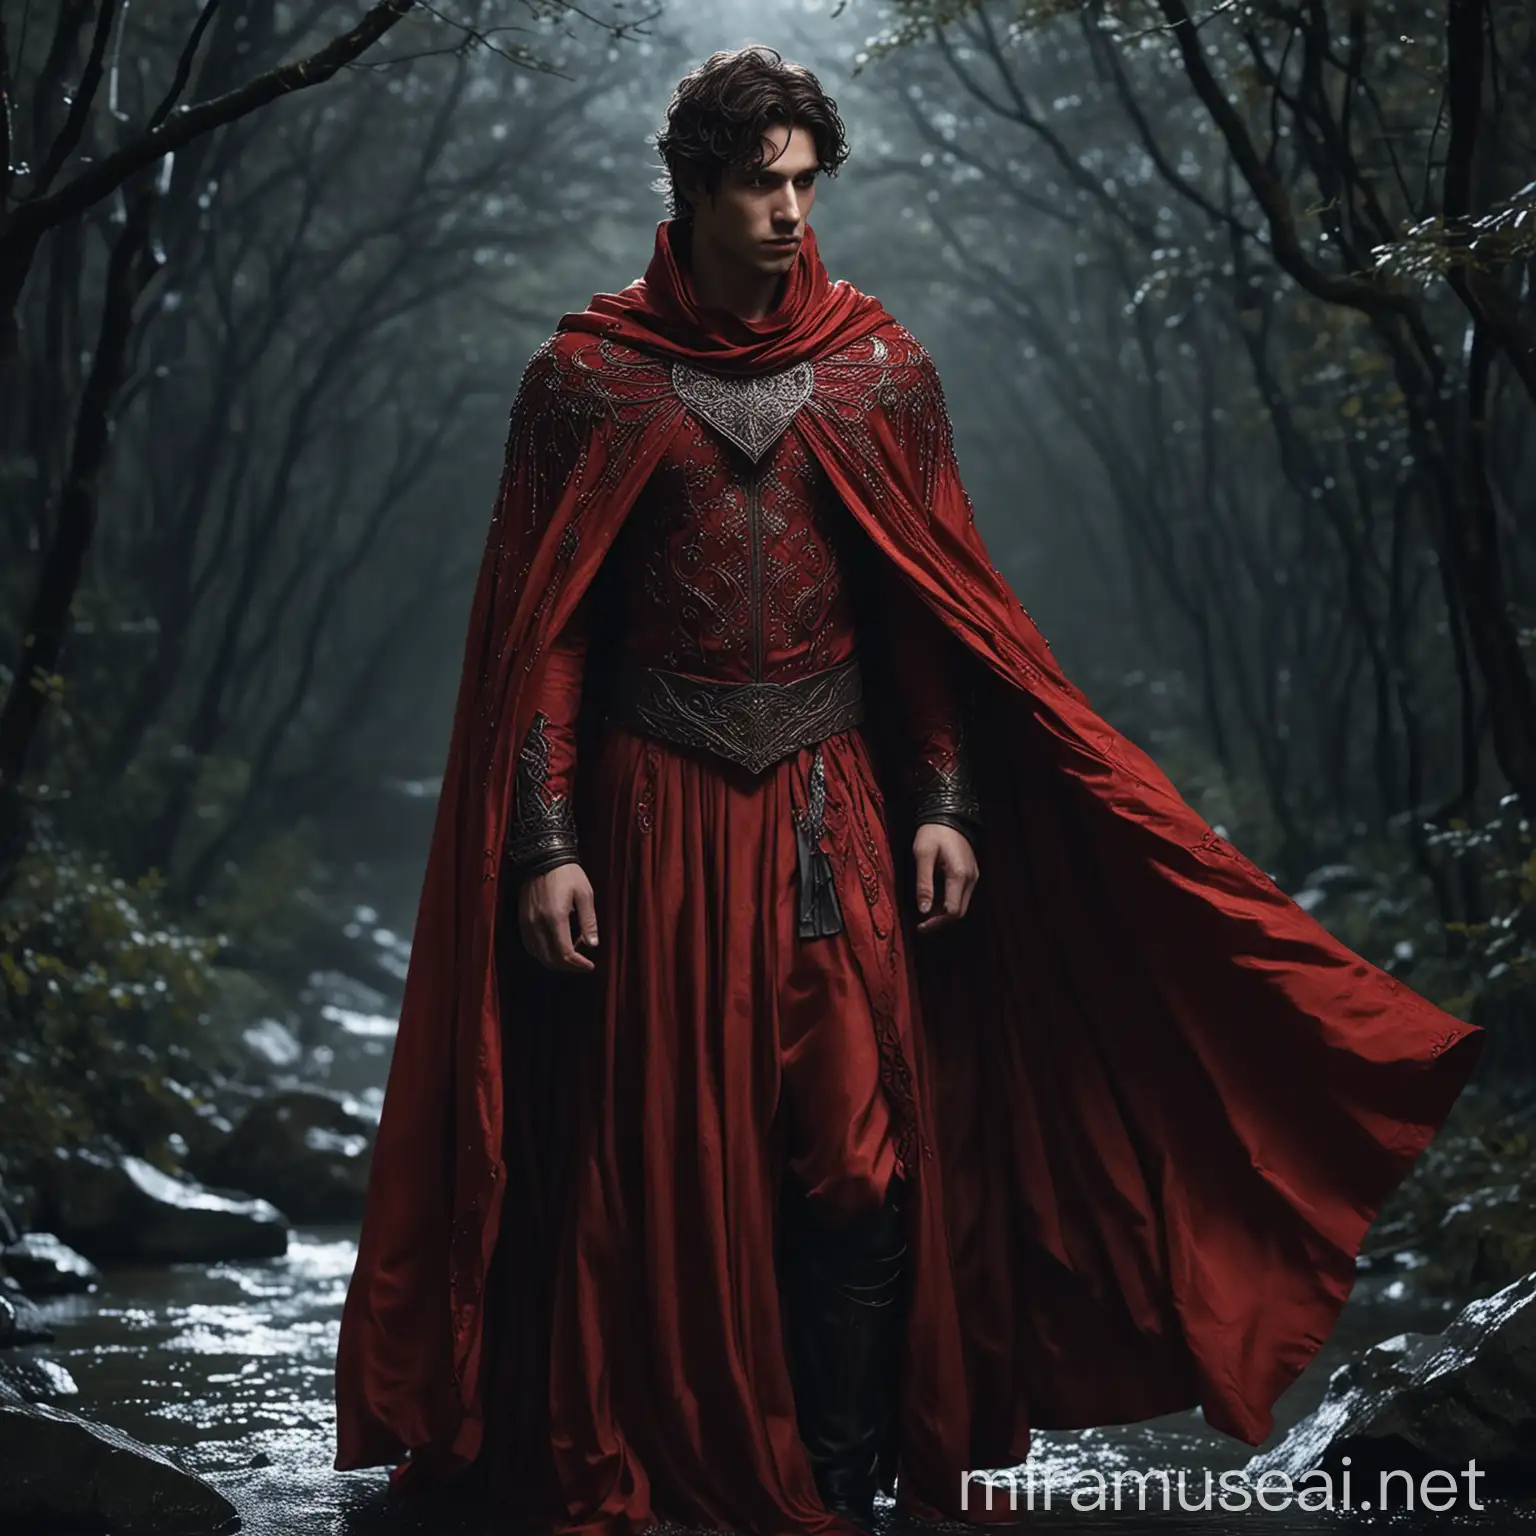 Ethereal Crimson Cape Fantasy Character in HighQuality Costume